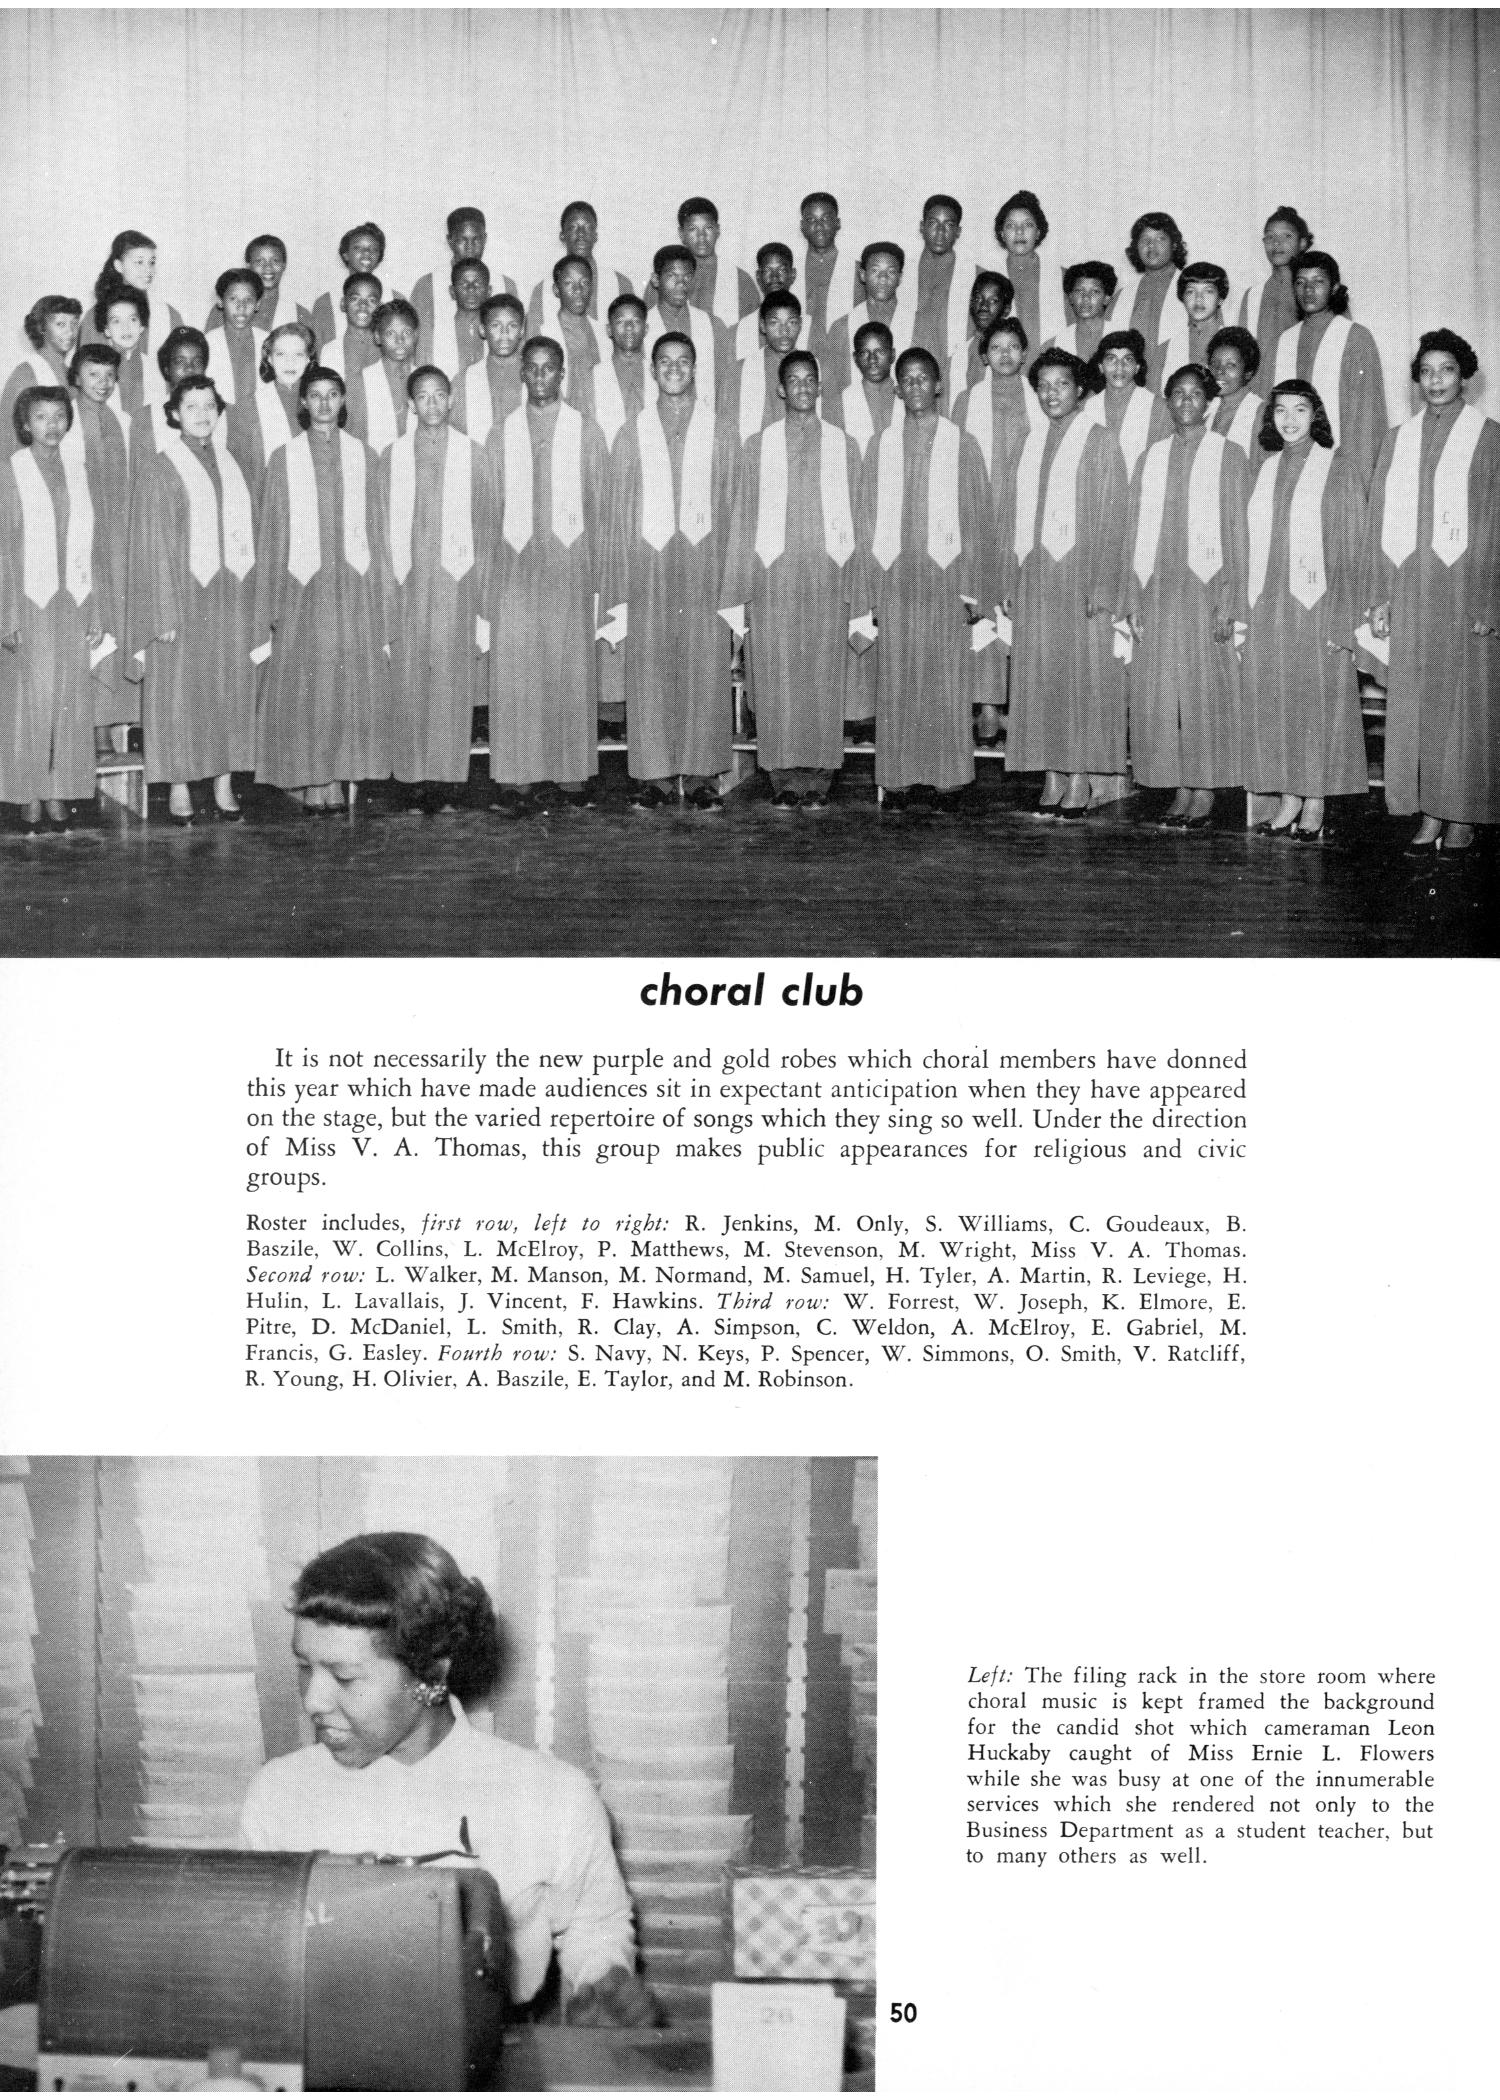 The Bumblebee, Yearbook of Lincoln High School, 1956
                                                
                                                    50
                                                